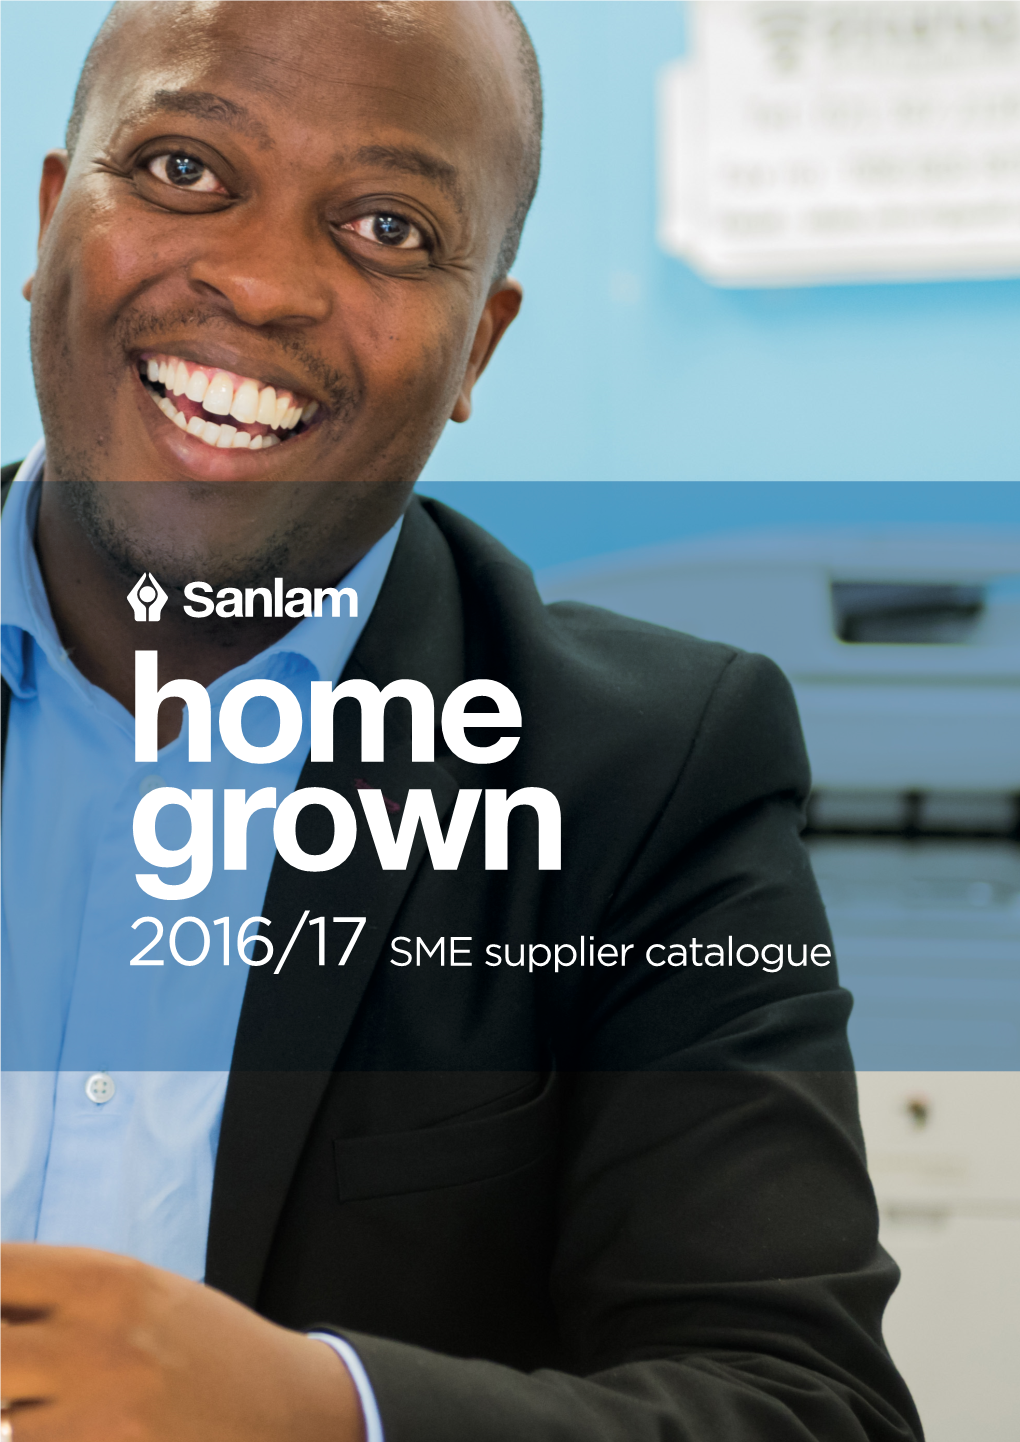 SME Supplier Catalogue Our Accelerator Project Is Developing Selected, Black-Owned Smes Within Sanlam’S Supply Chain and Target Markets